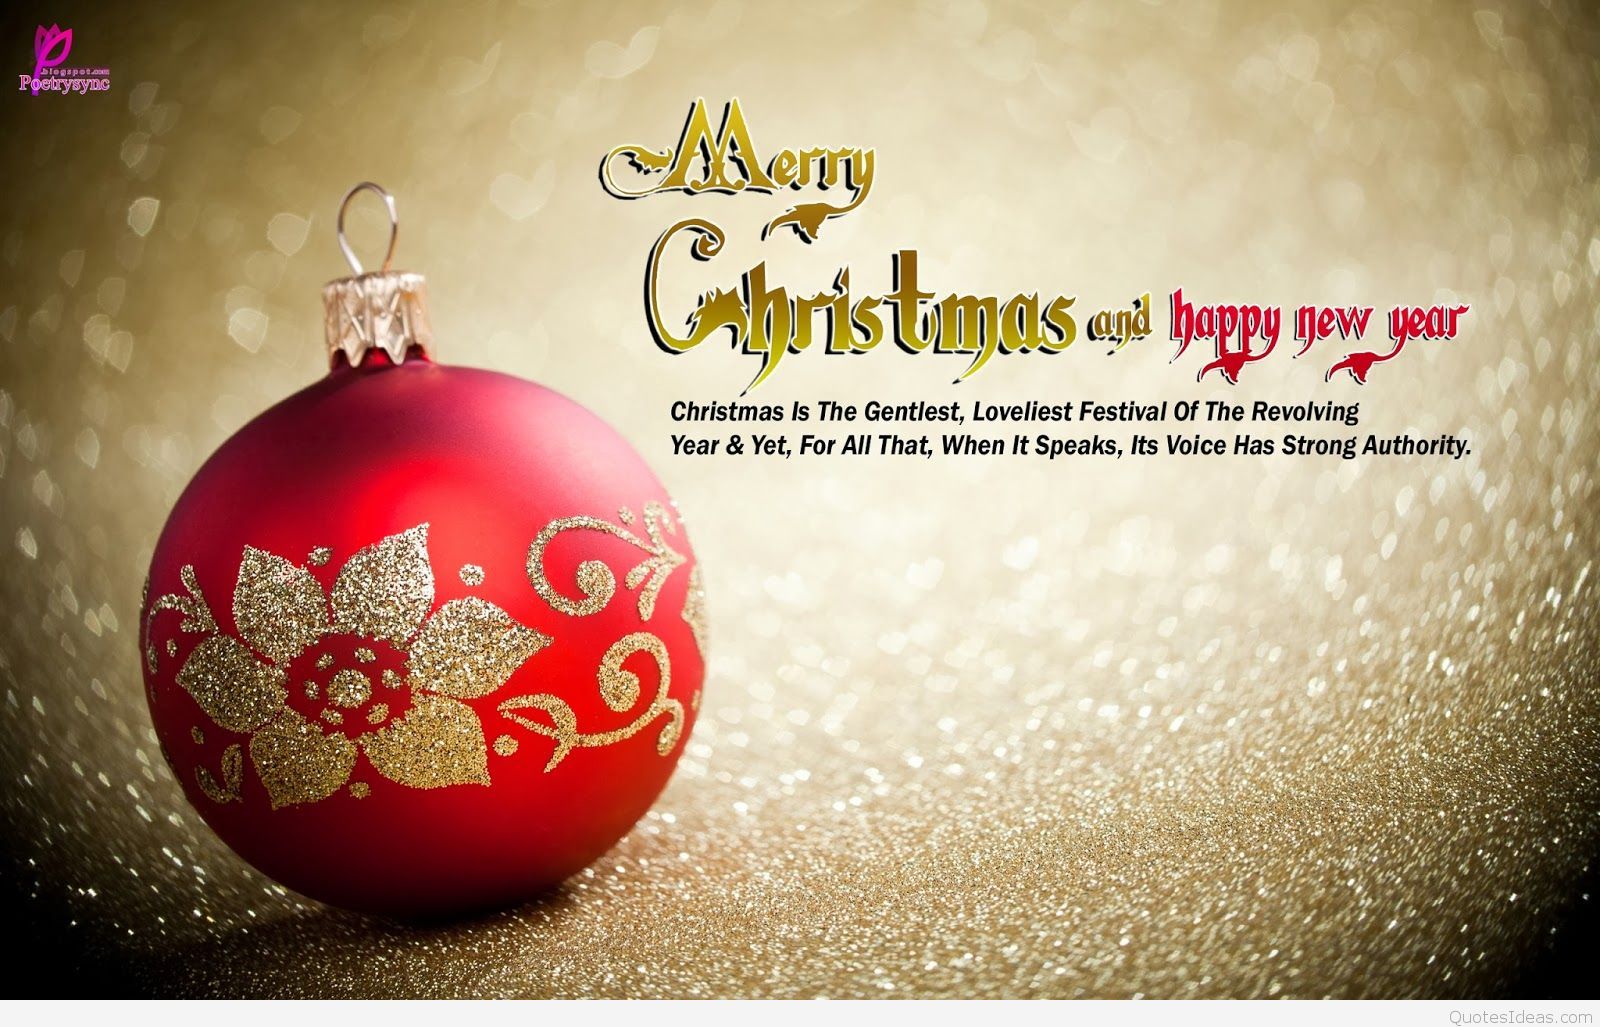 Beautiful Merry Christmas wallpaper with quotes